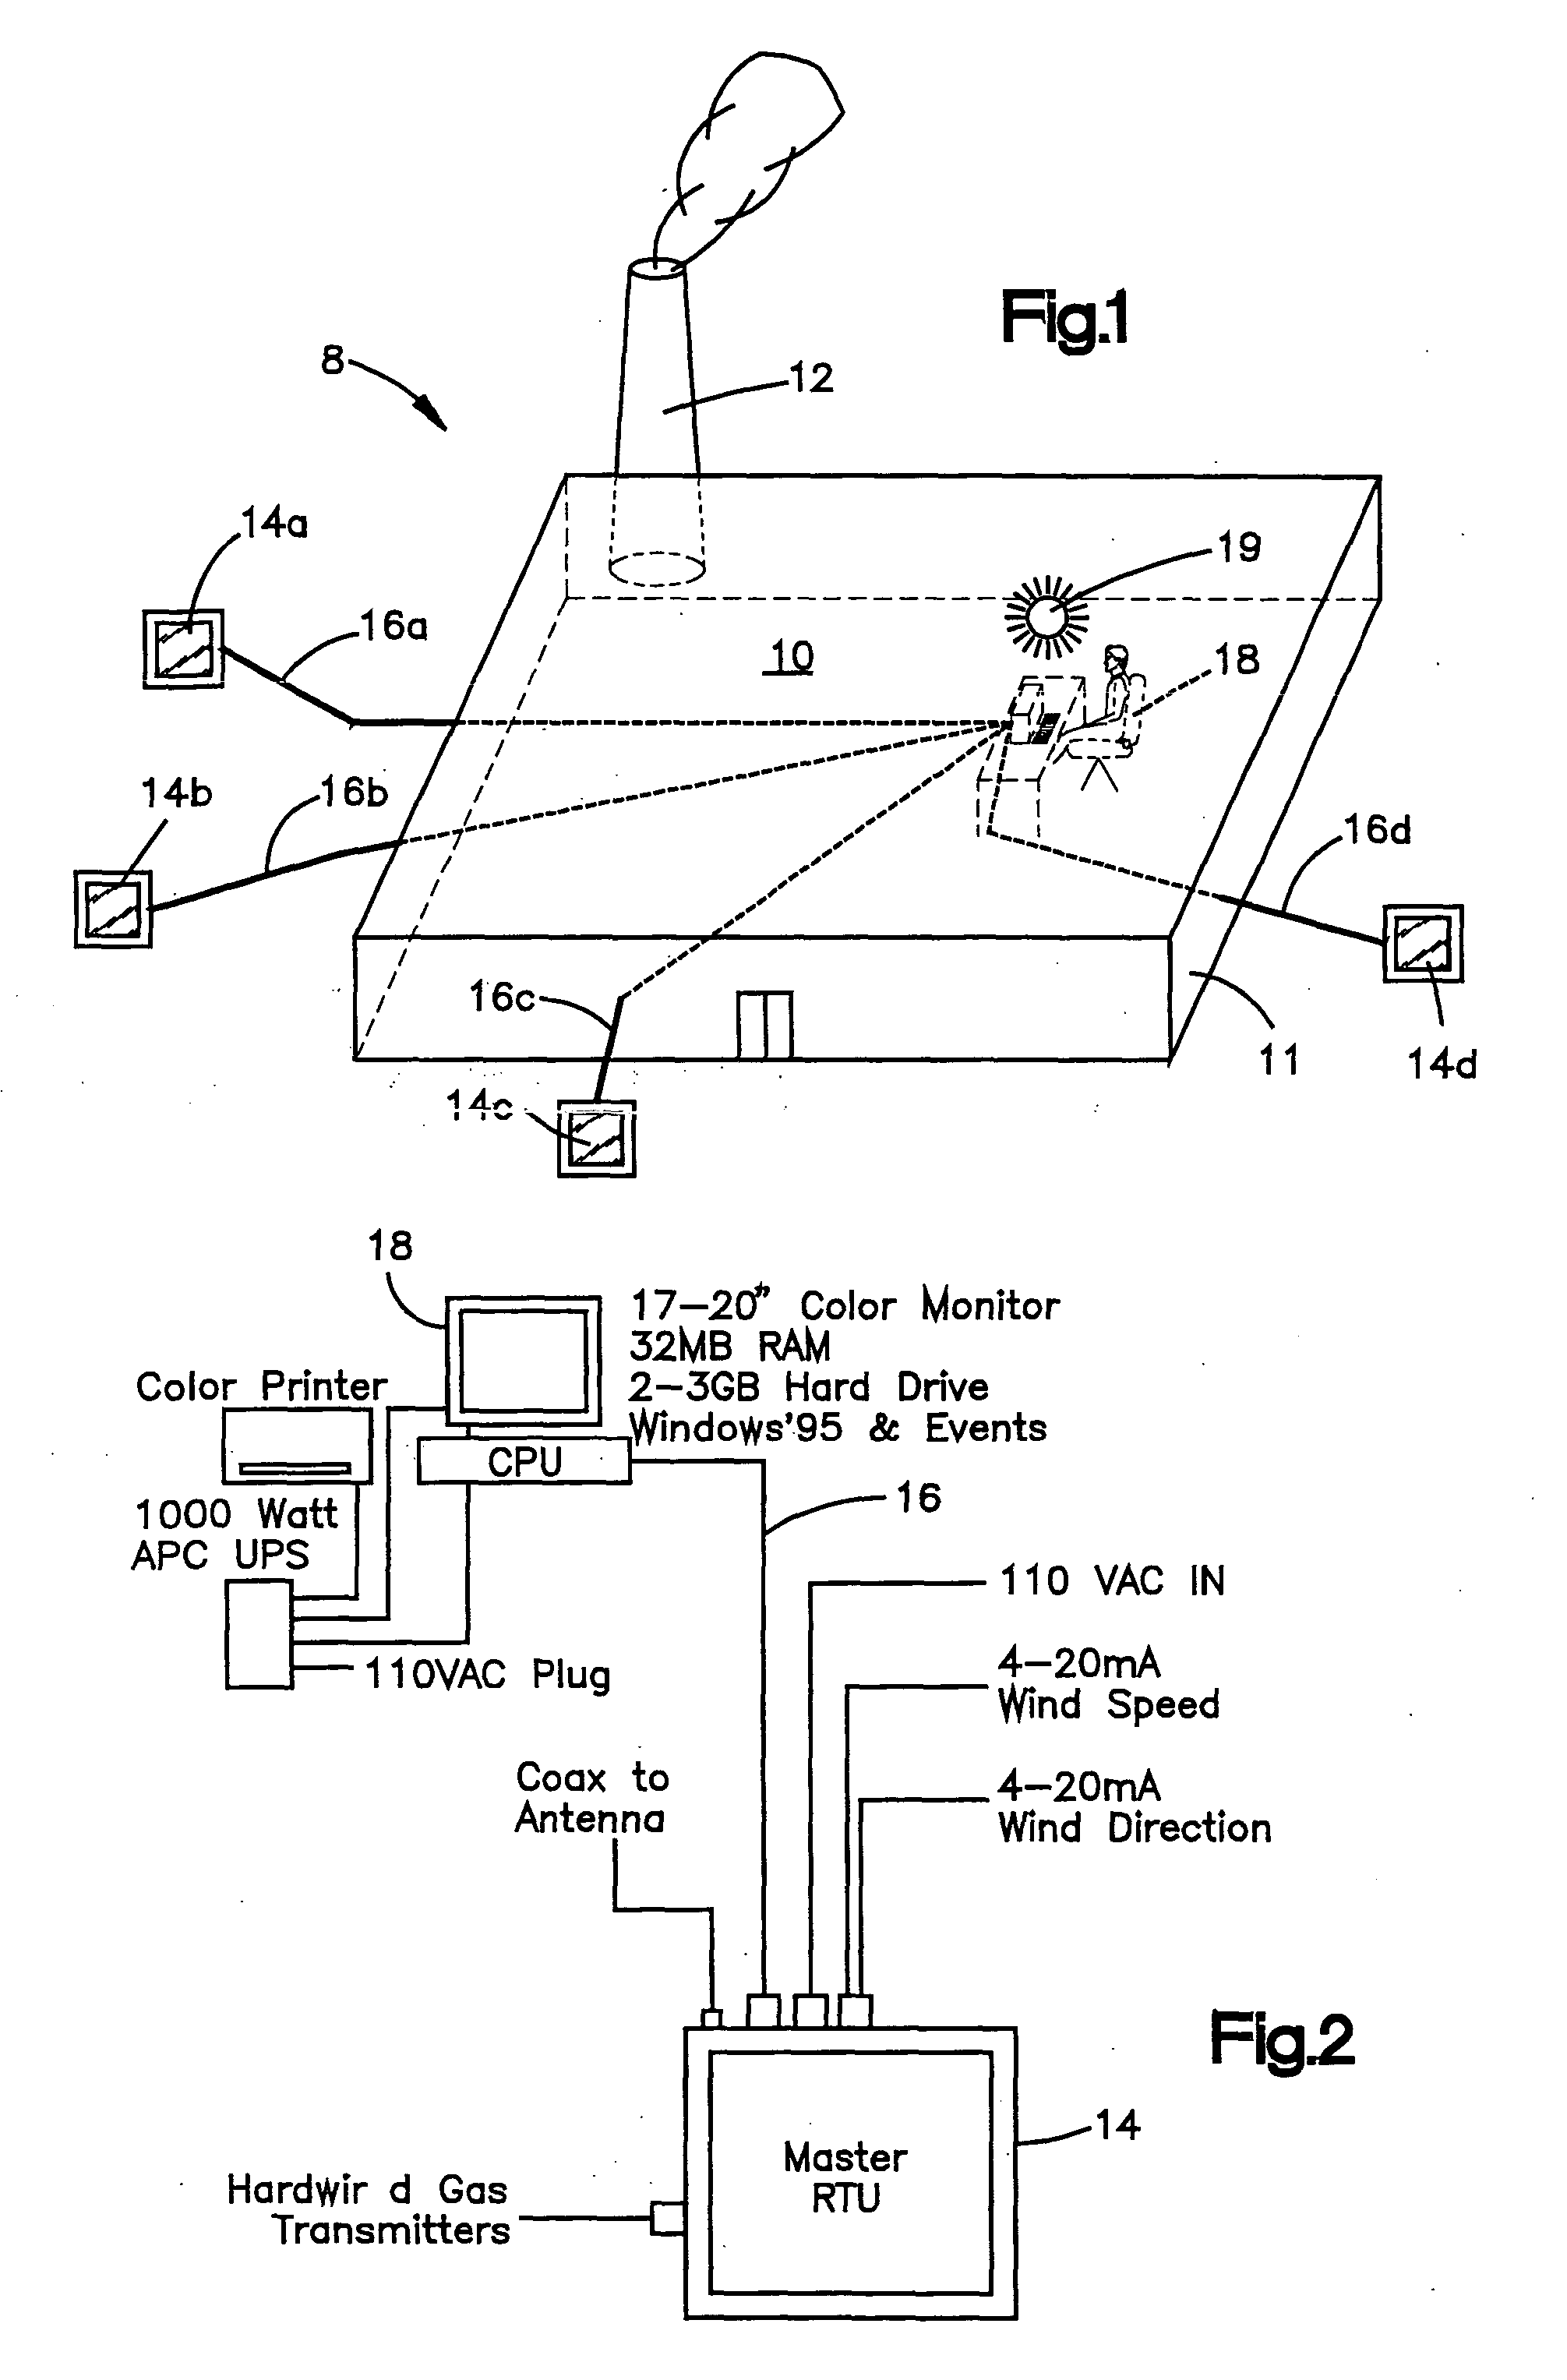 Apparatus and method for wireless gas monitoring